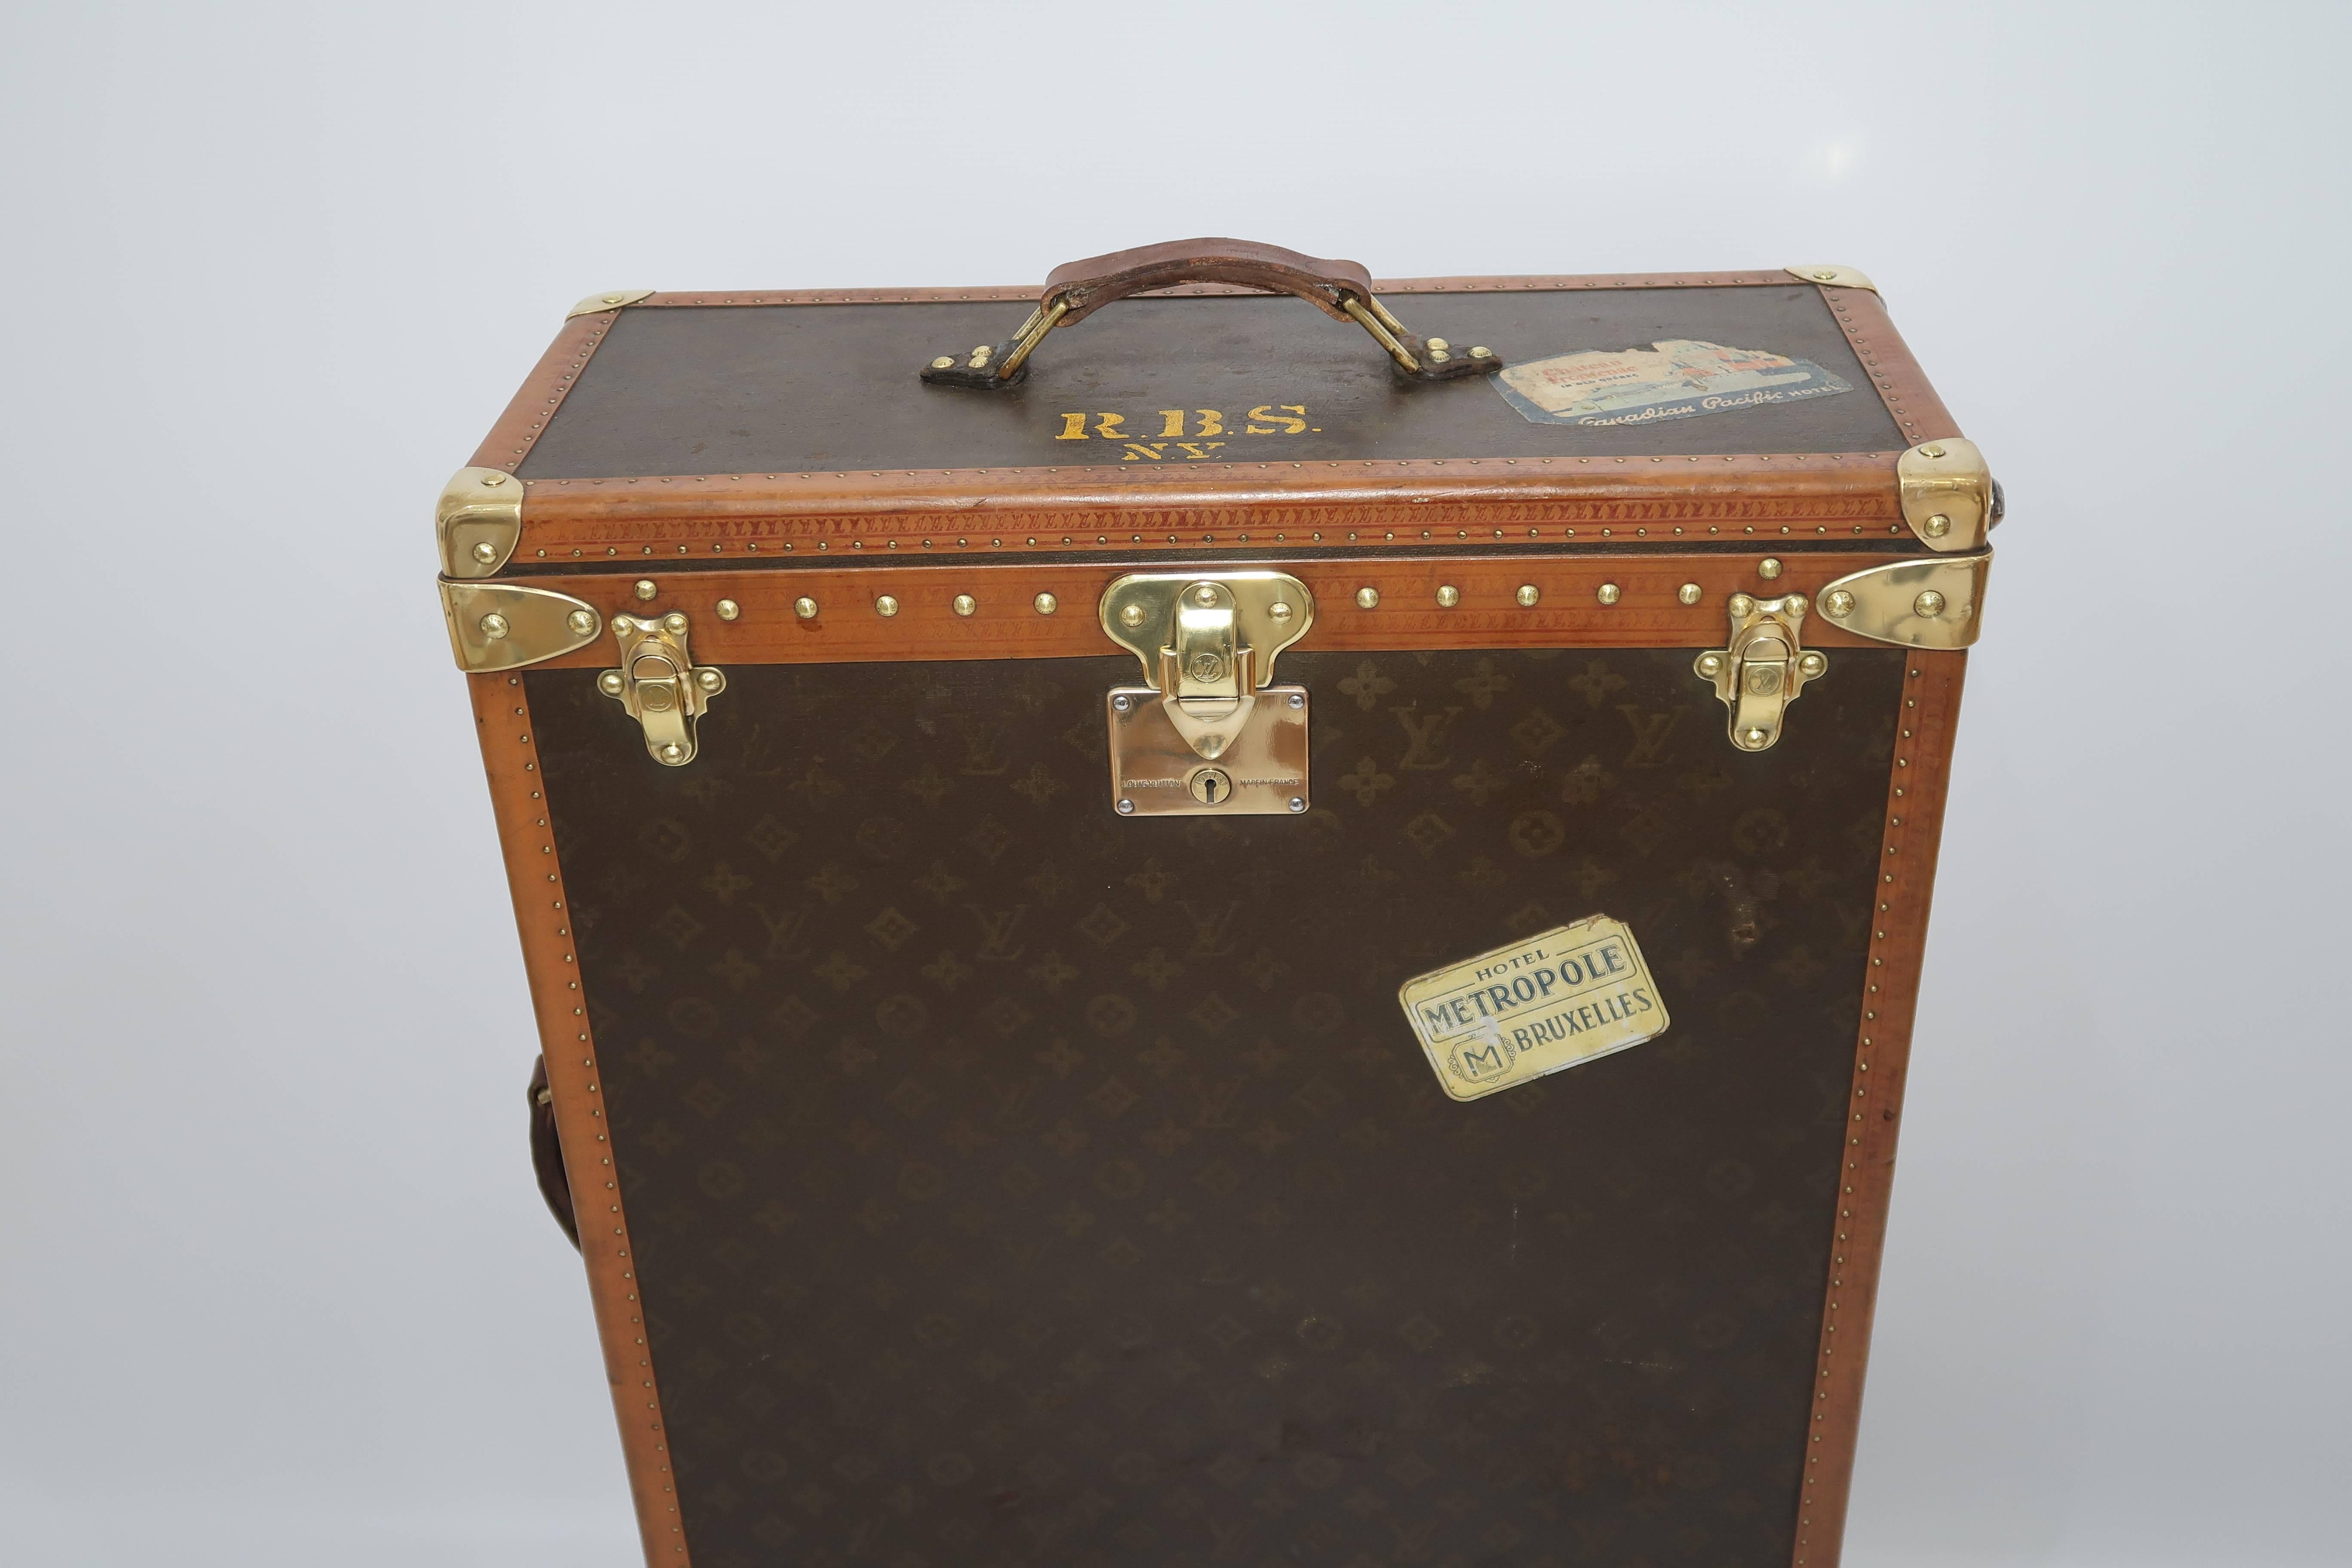 For sale an antique Louis Vuitton Monogram wardrobe trunk, finished in Monogram canvas with brass hardware, original travel and hotel stickers and LV stamped lozine bounding.

Perfect dimensions so that it can be used as TV stand or side table.